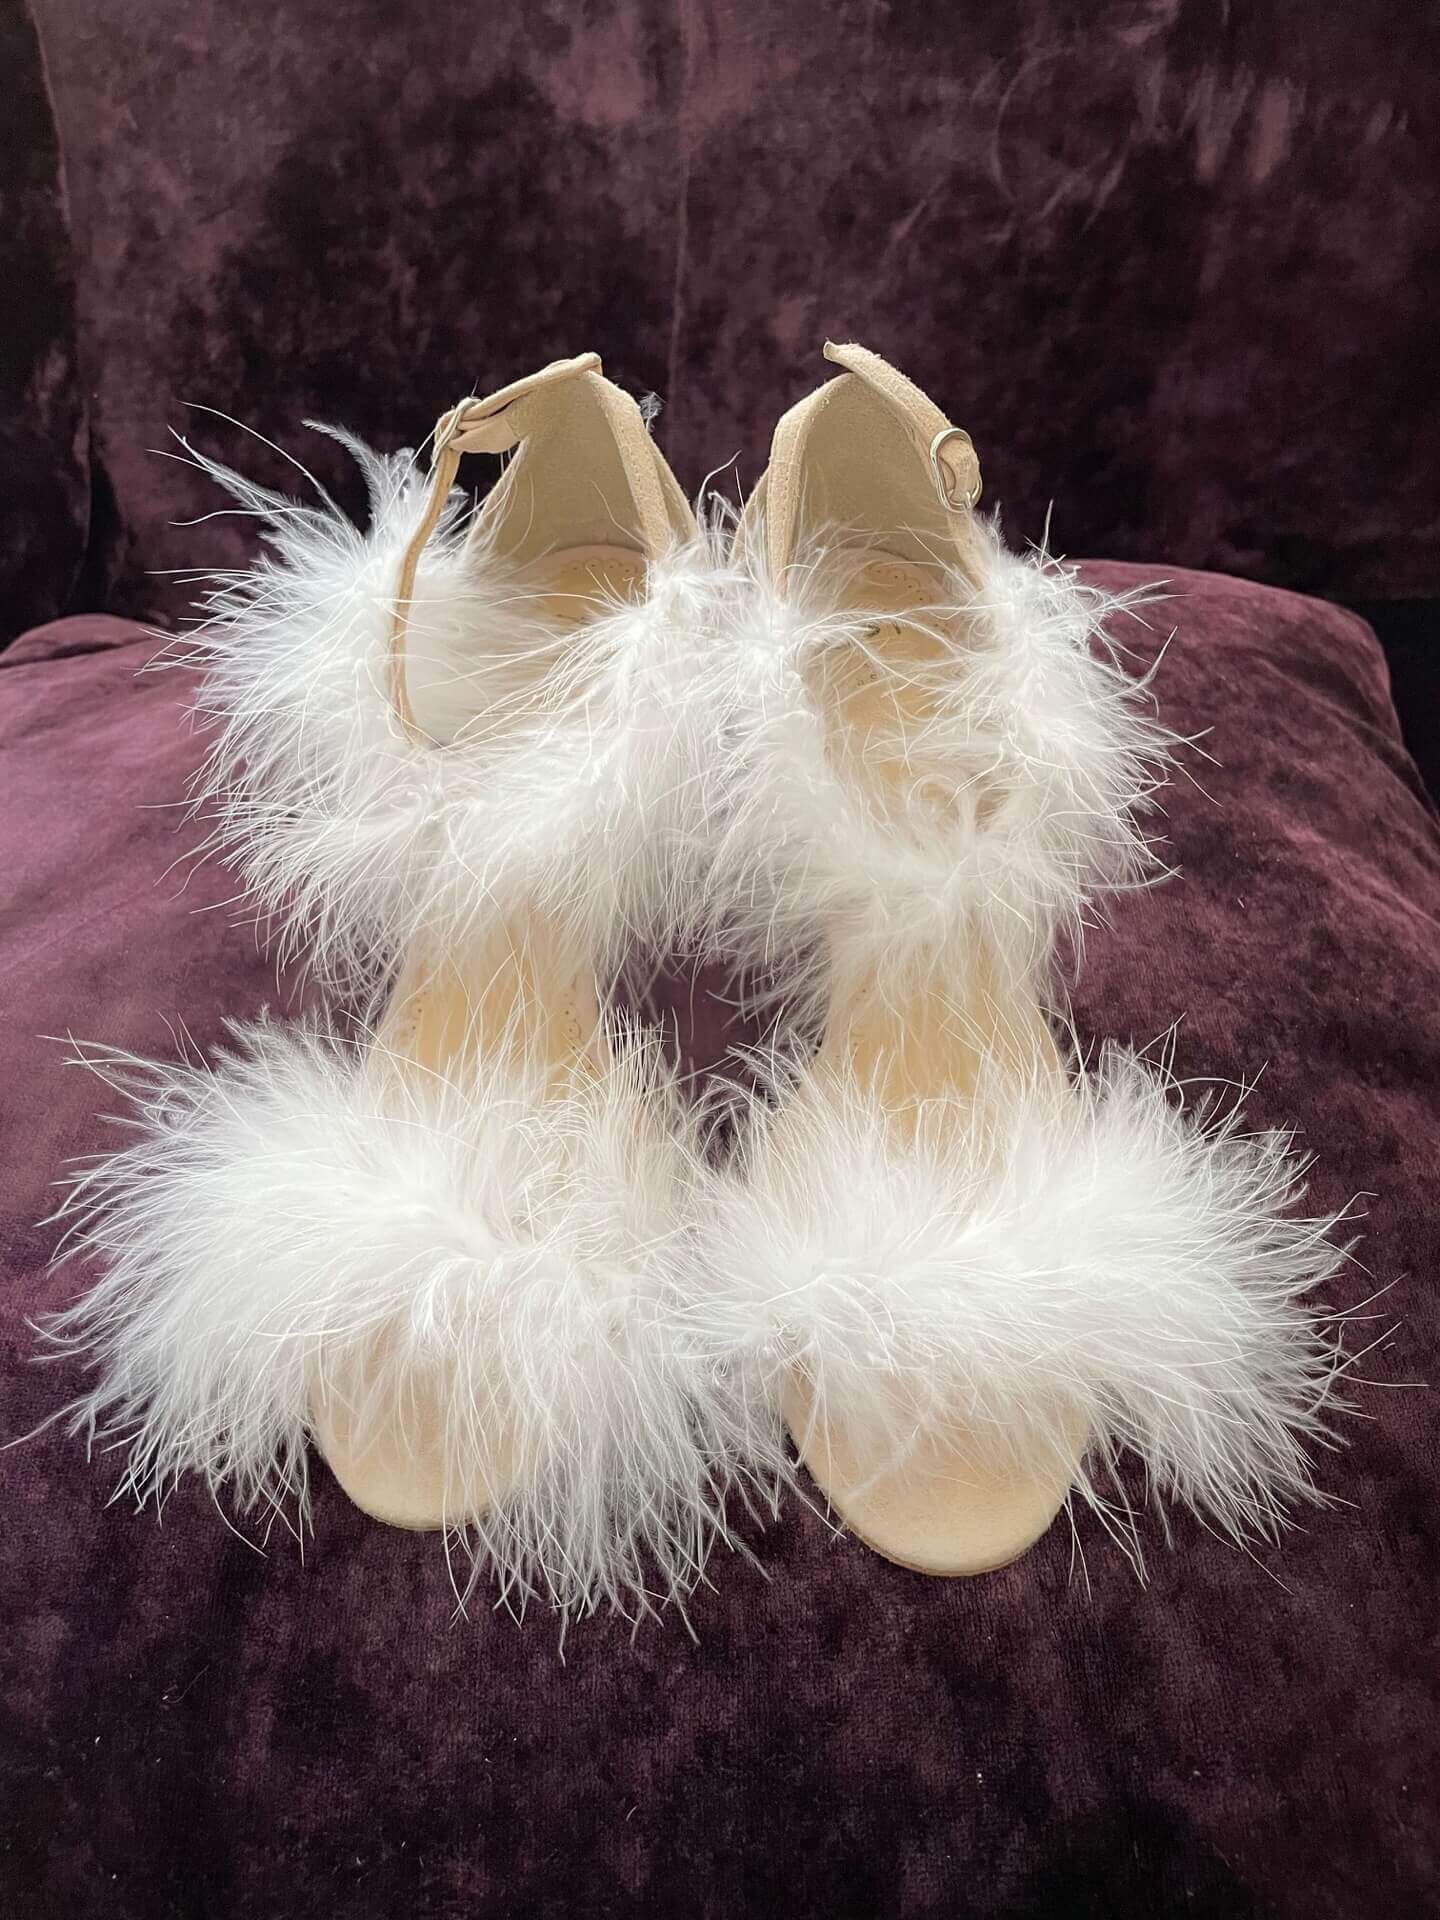 Flirty fluffy feathered wedding sandals by Di Hassall